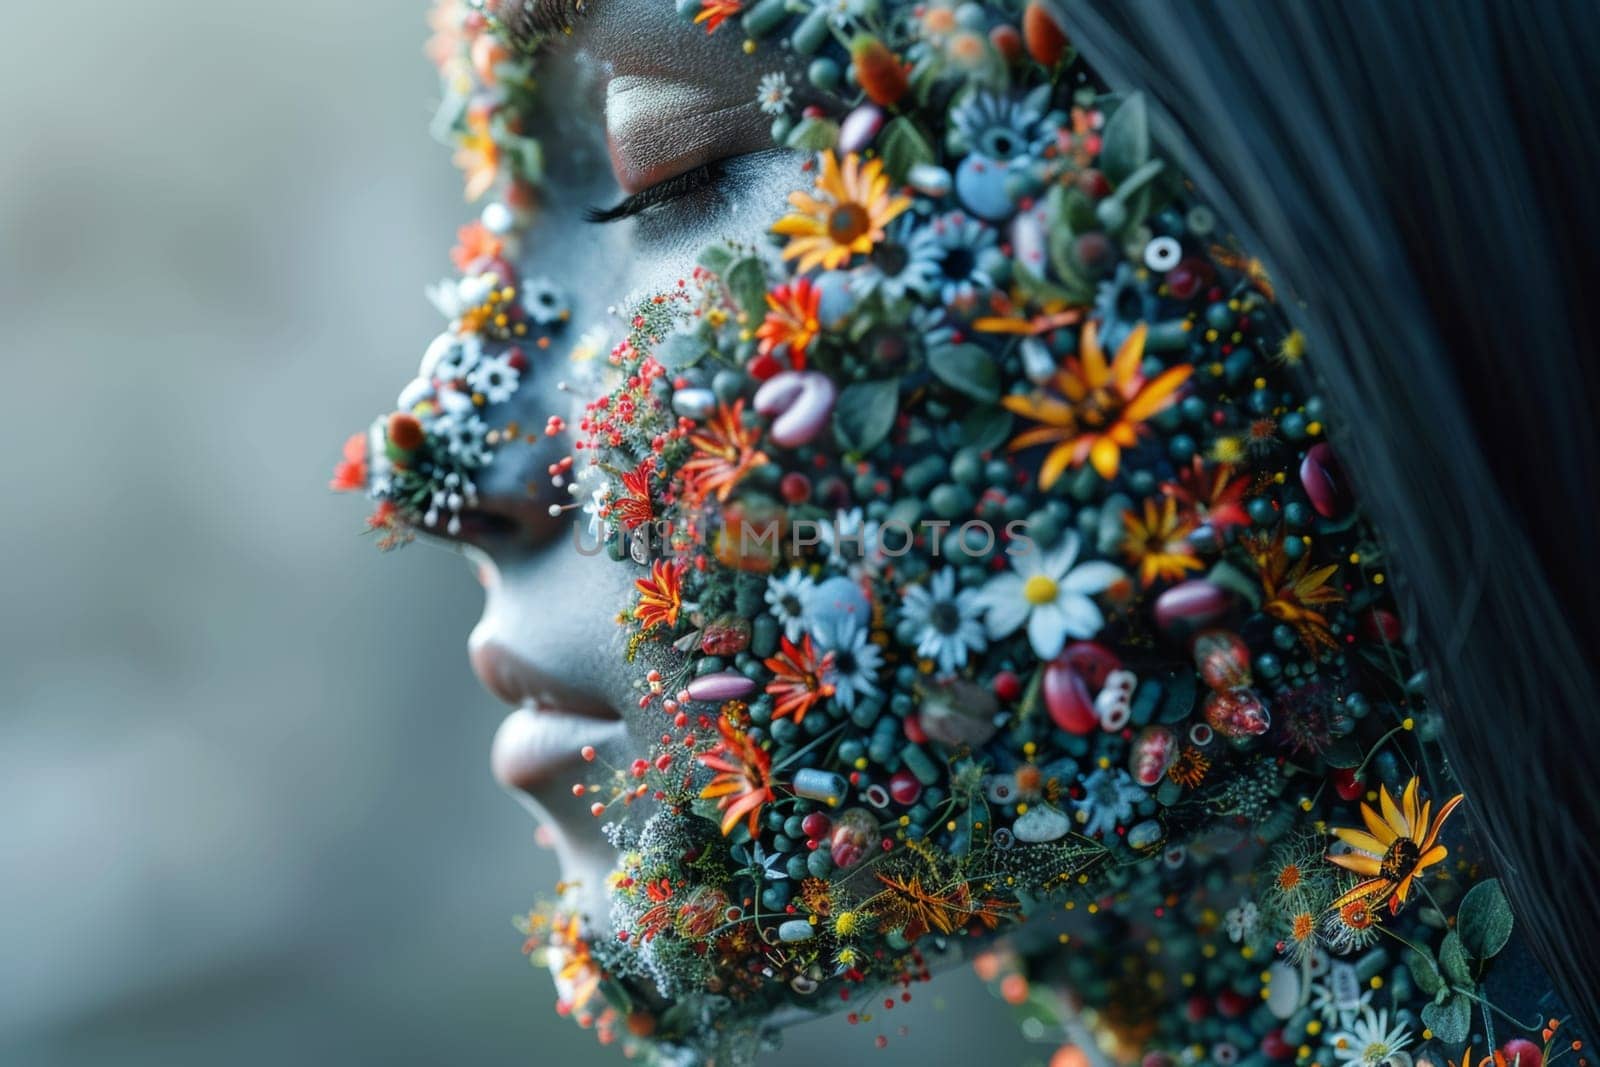 The woman's face is covered with various pills and capsules symbolizing medicines and health care.